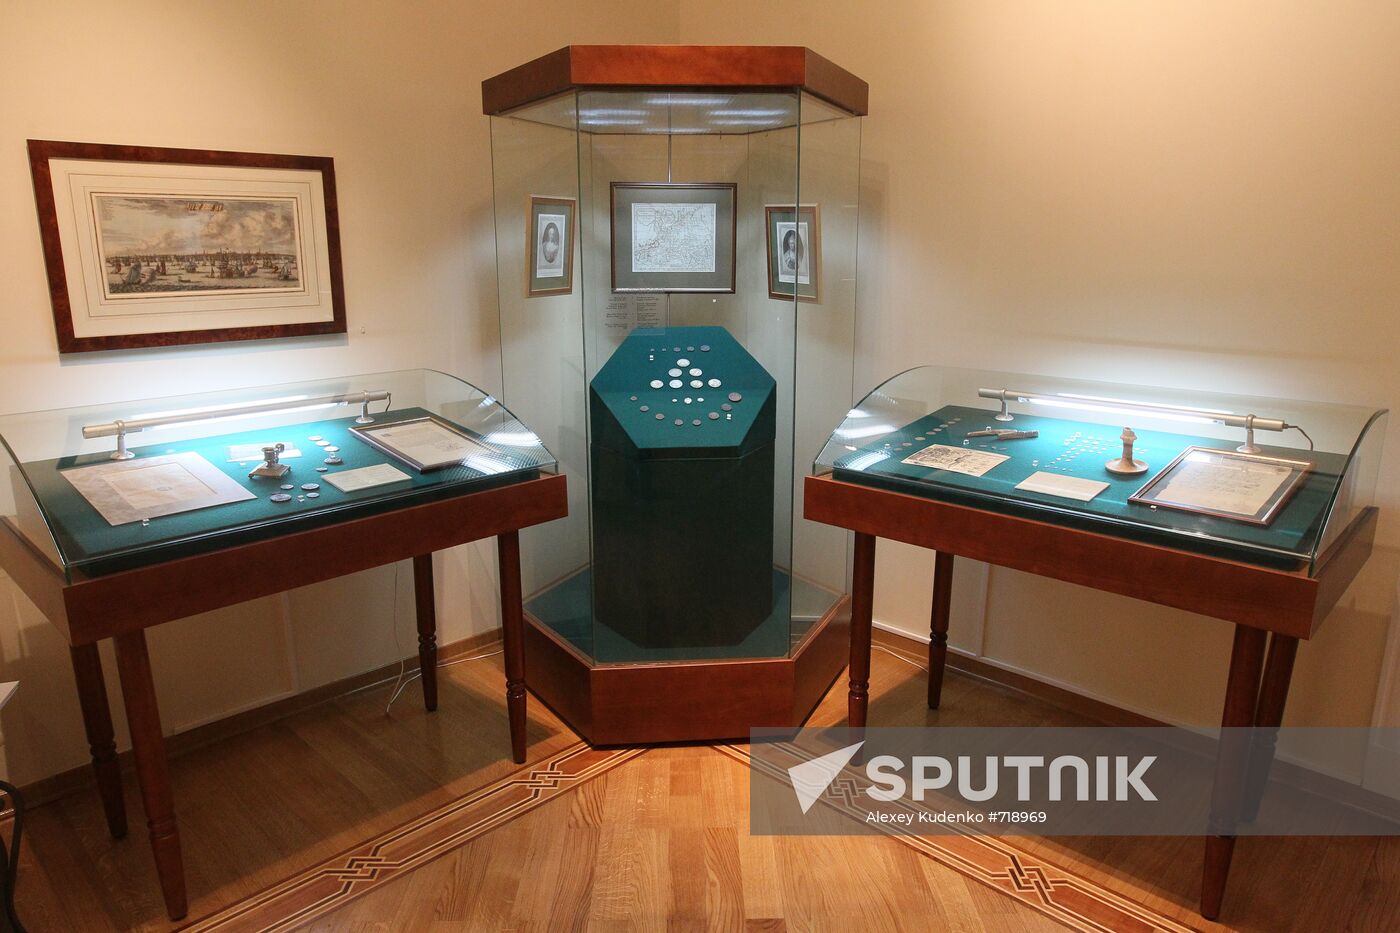 Exhibition of RF Central Bank Museum